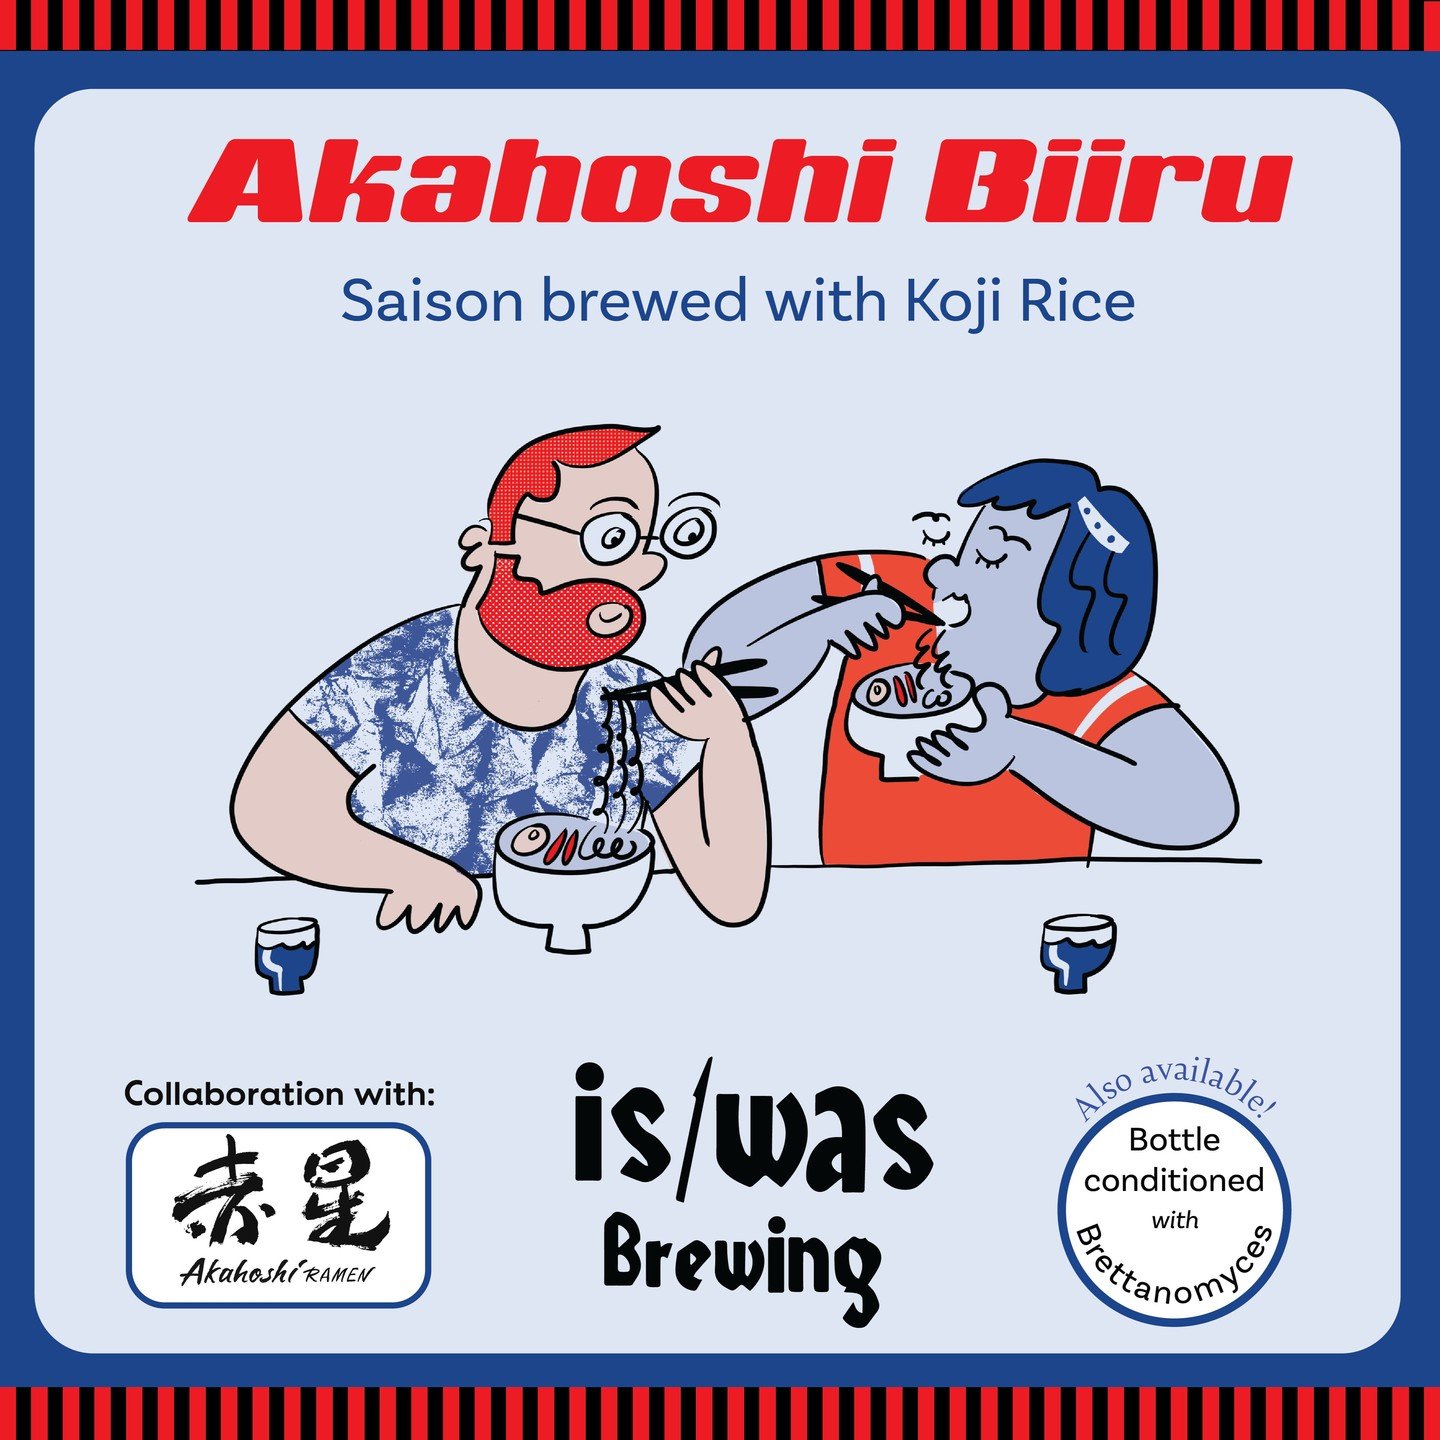 Akahoshi Biiru - Saison Brewed with Koji Rice - Made in collaboration with our friends at @akahoshiramen 

The base version is only available at Akahoshi and at our web shop. Link in bio to get yours.

Artwork by @josephkarlkraft